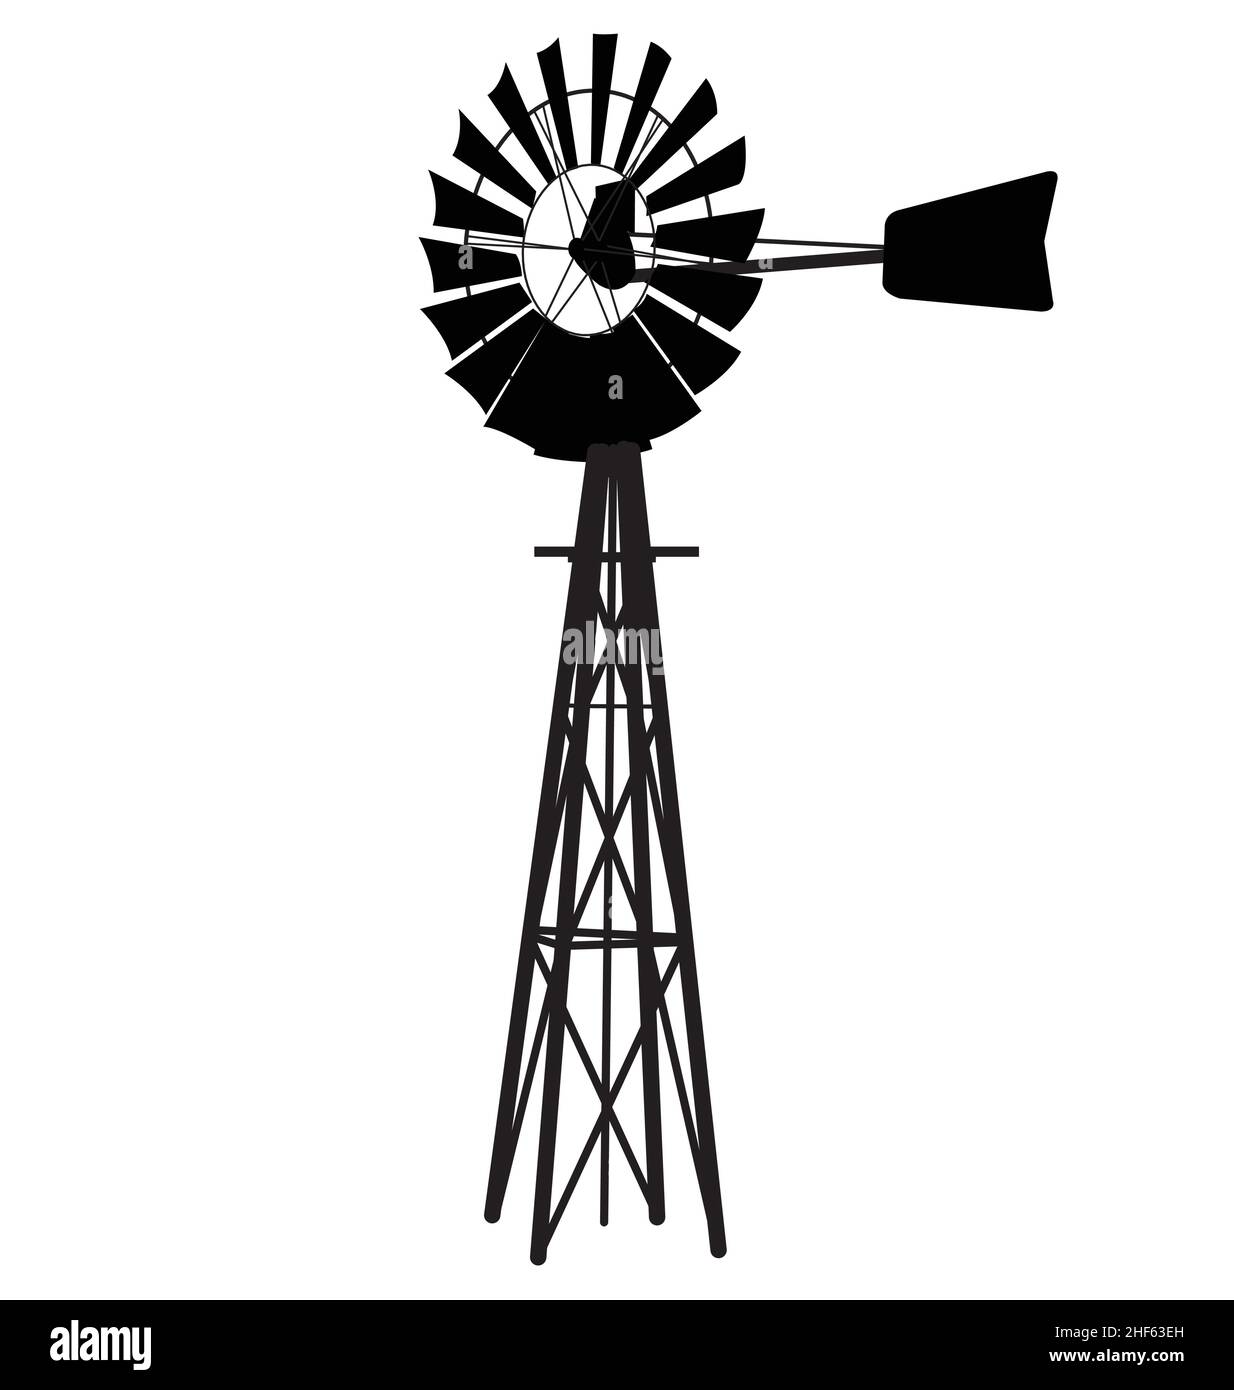 classic australian metal windmill windpump silhouette vector isolated on white background Stock Vector